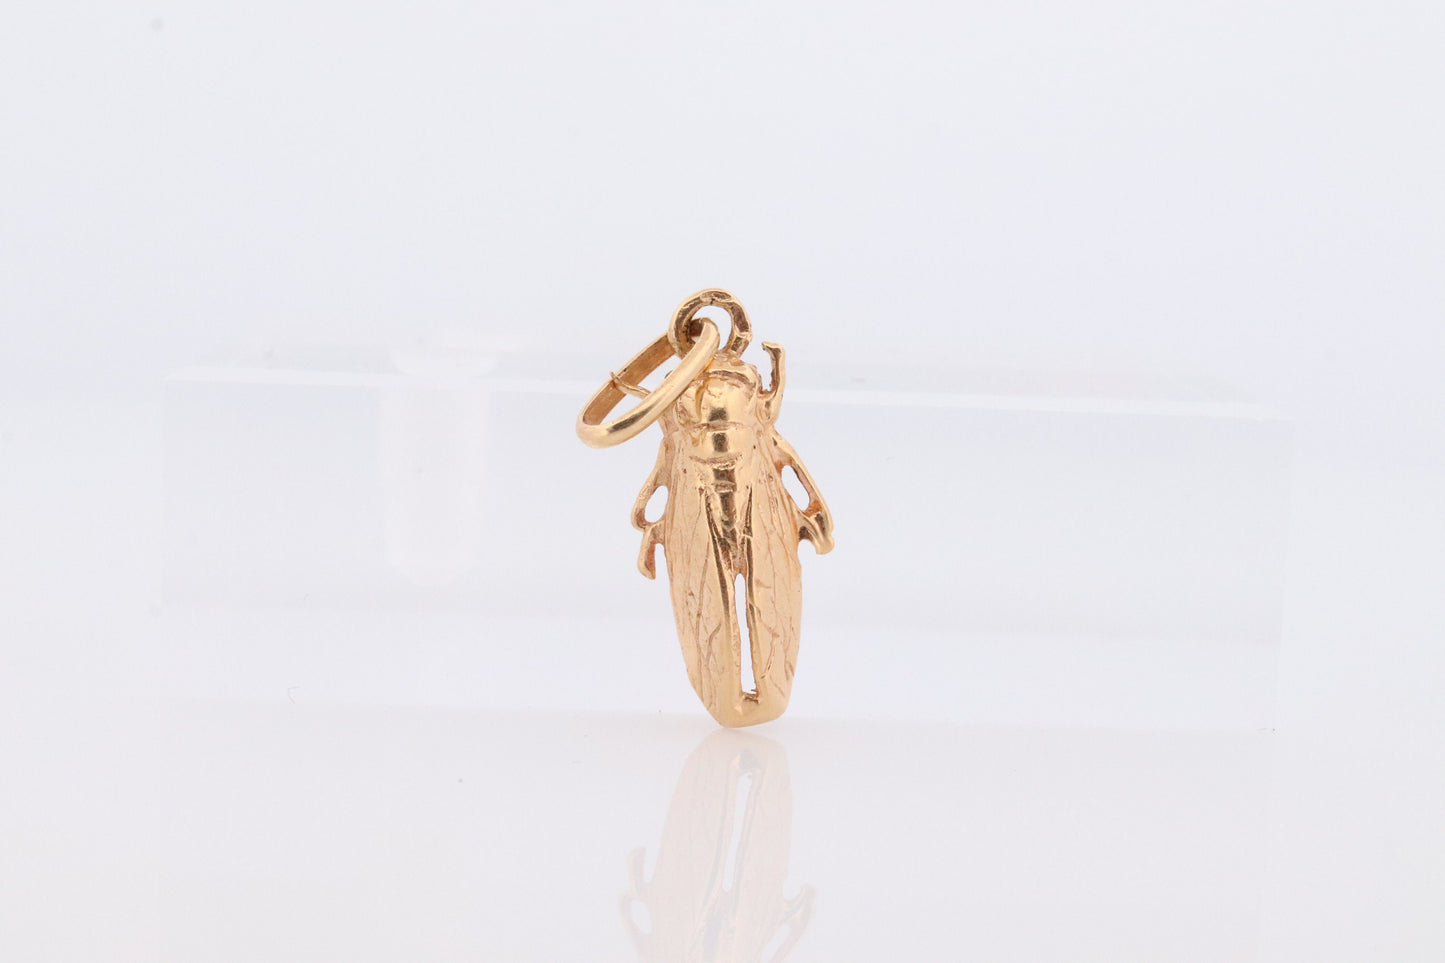 18k FLY Pendant. 18k Solid Yellow gold Fly Insect Charm. st(94)